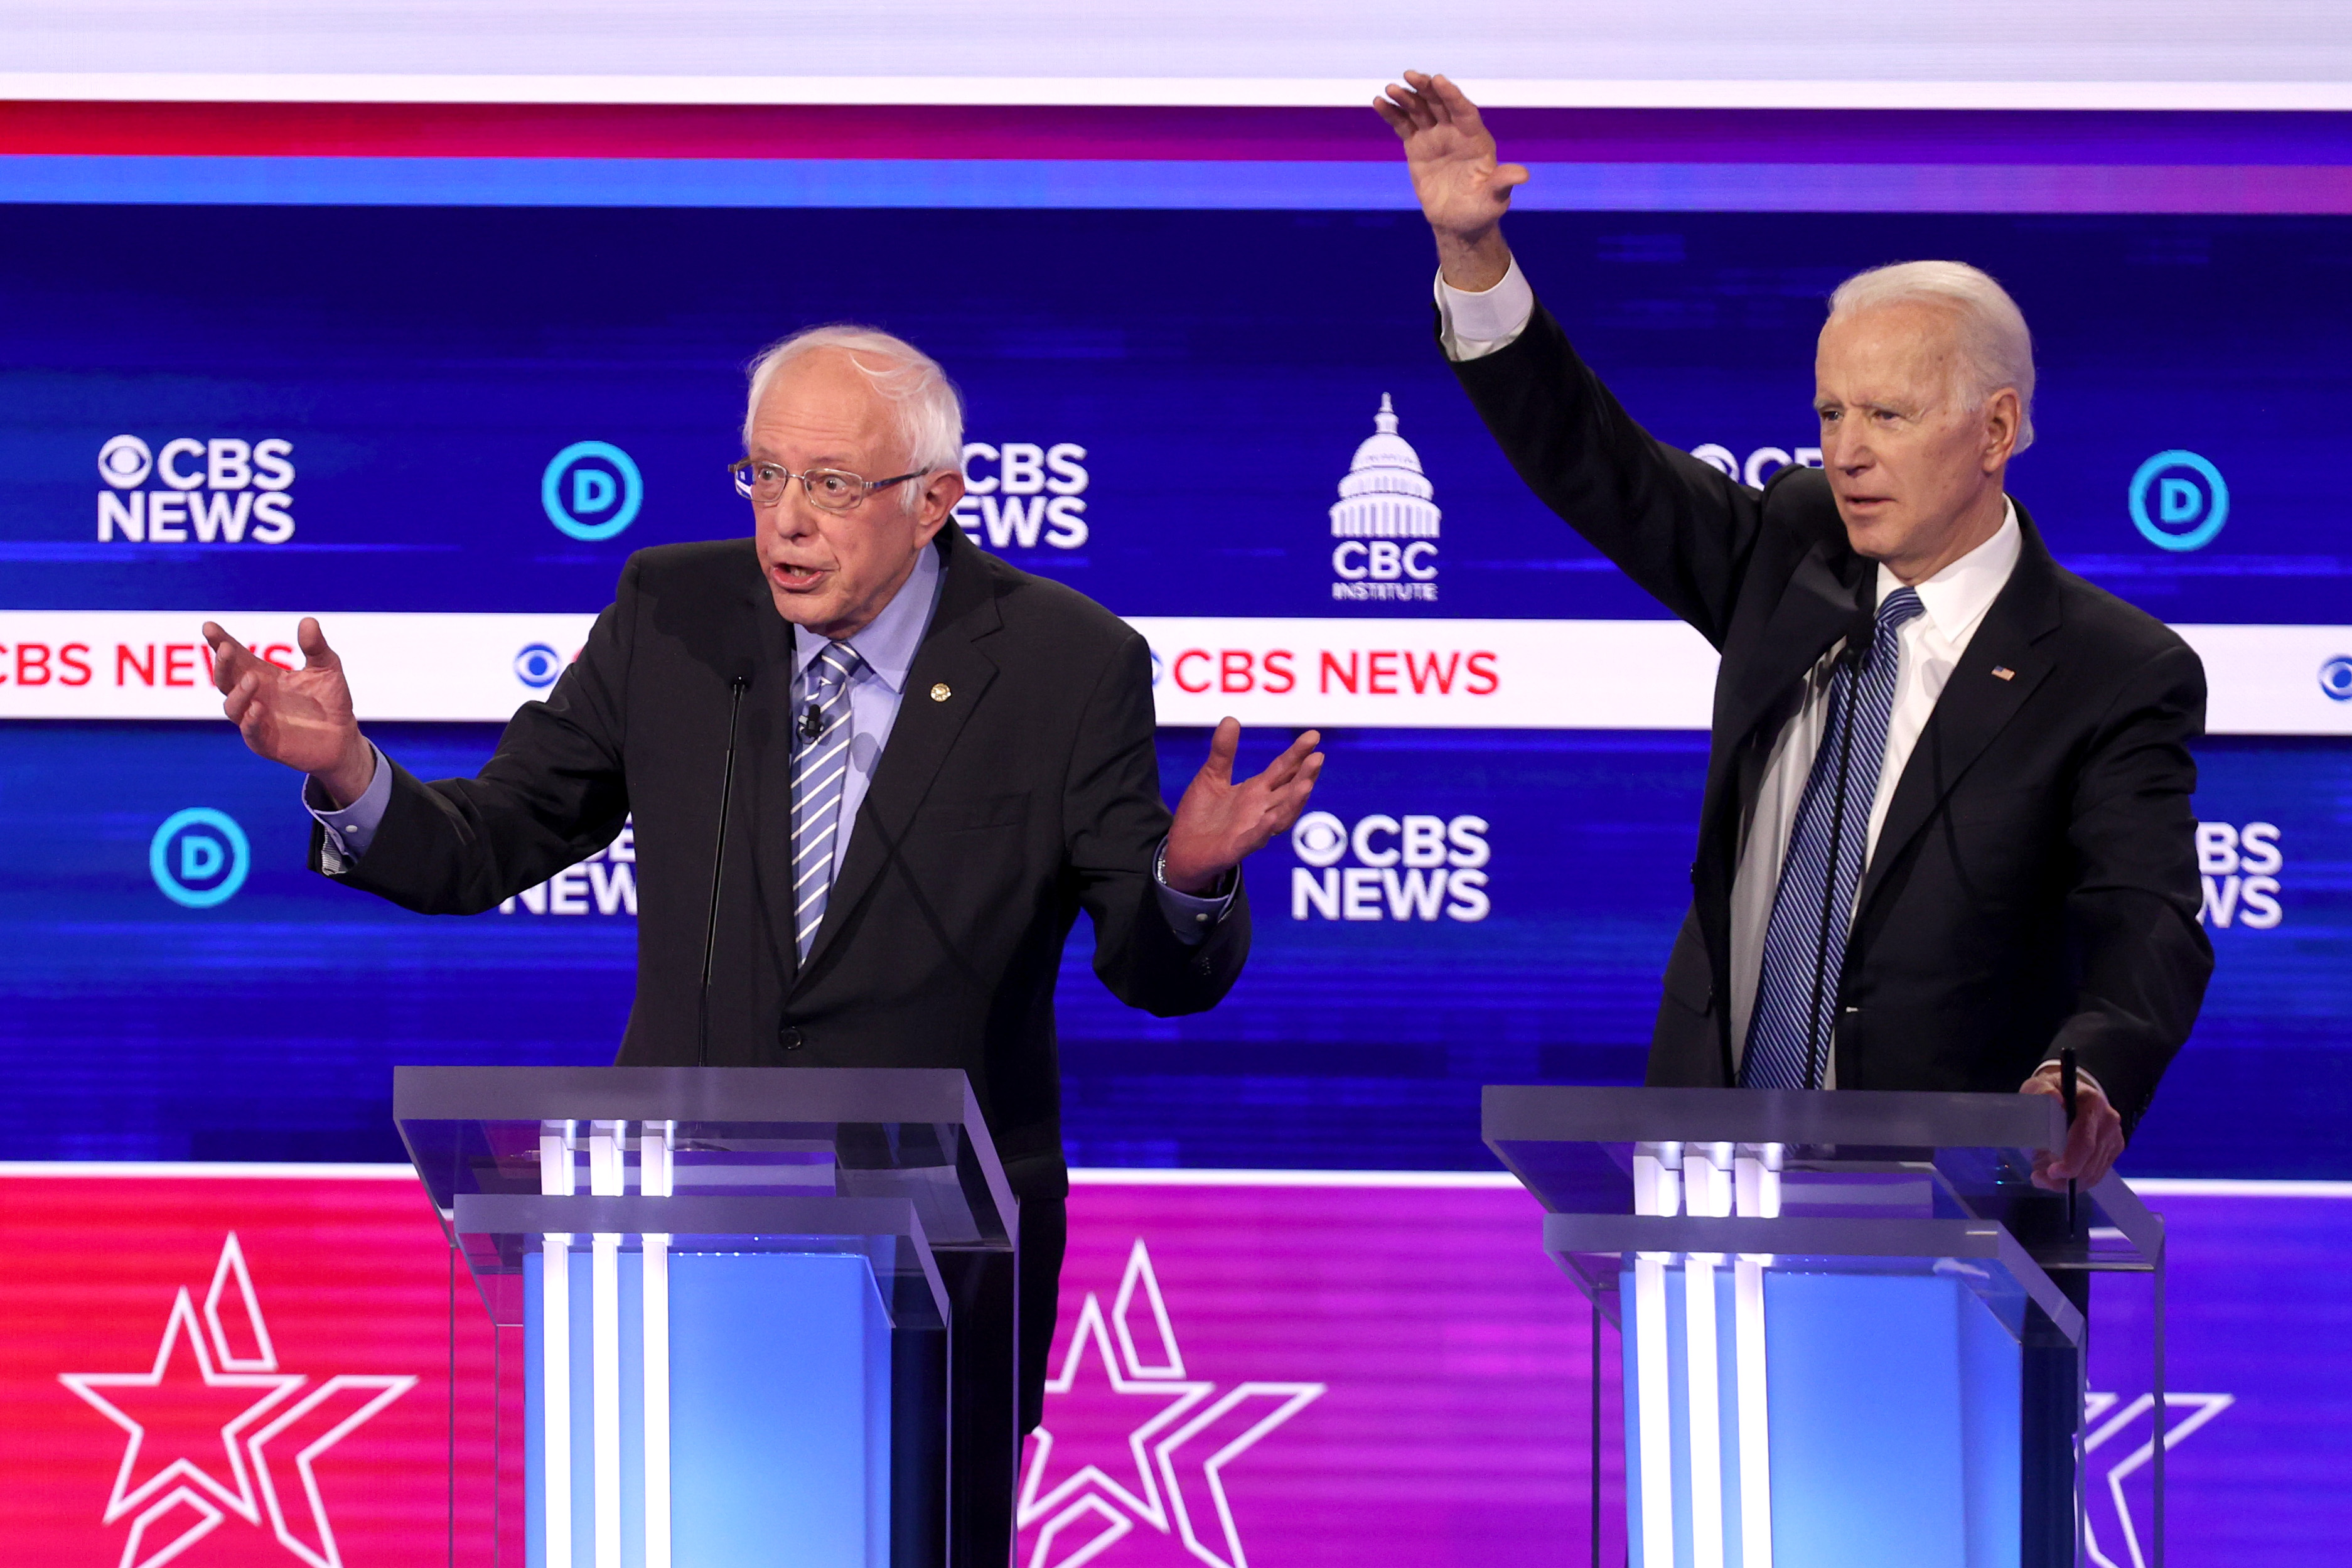 Senator Bernie Sanders and former Vice President Joe Biden stand onstage behind podiums with their arms raised.